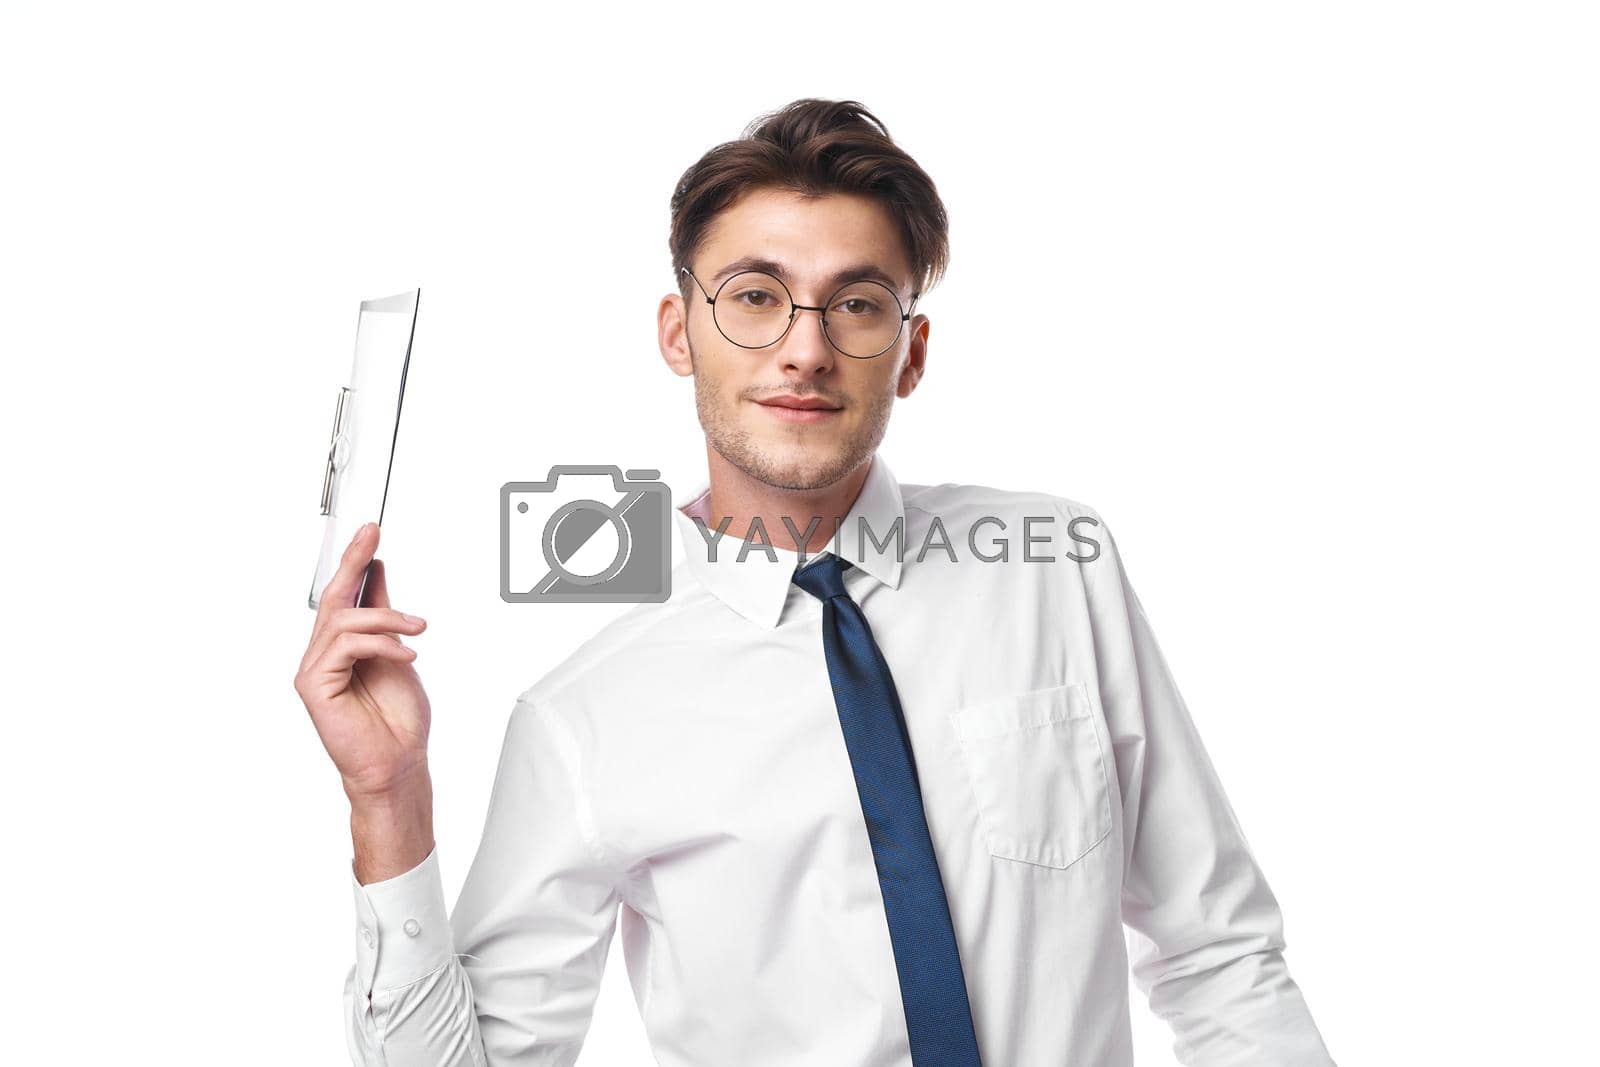 manager phone communication success work office isolated background. High quality photo